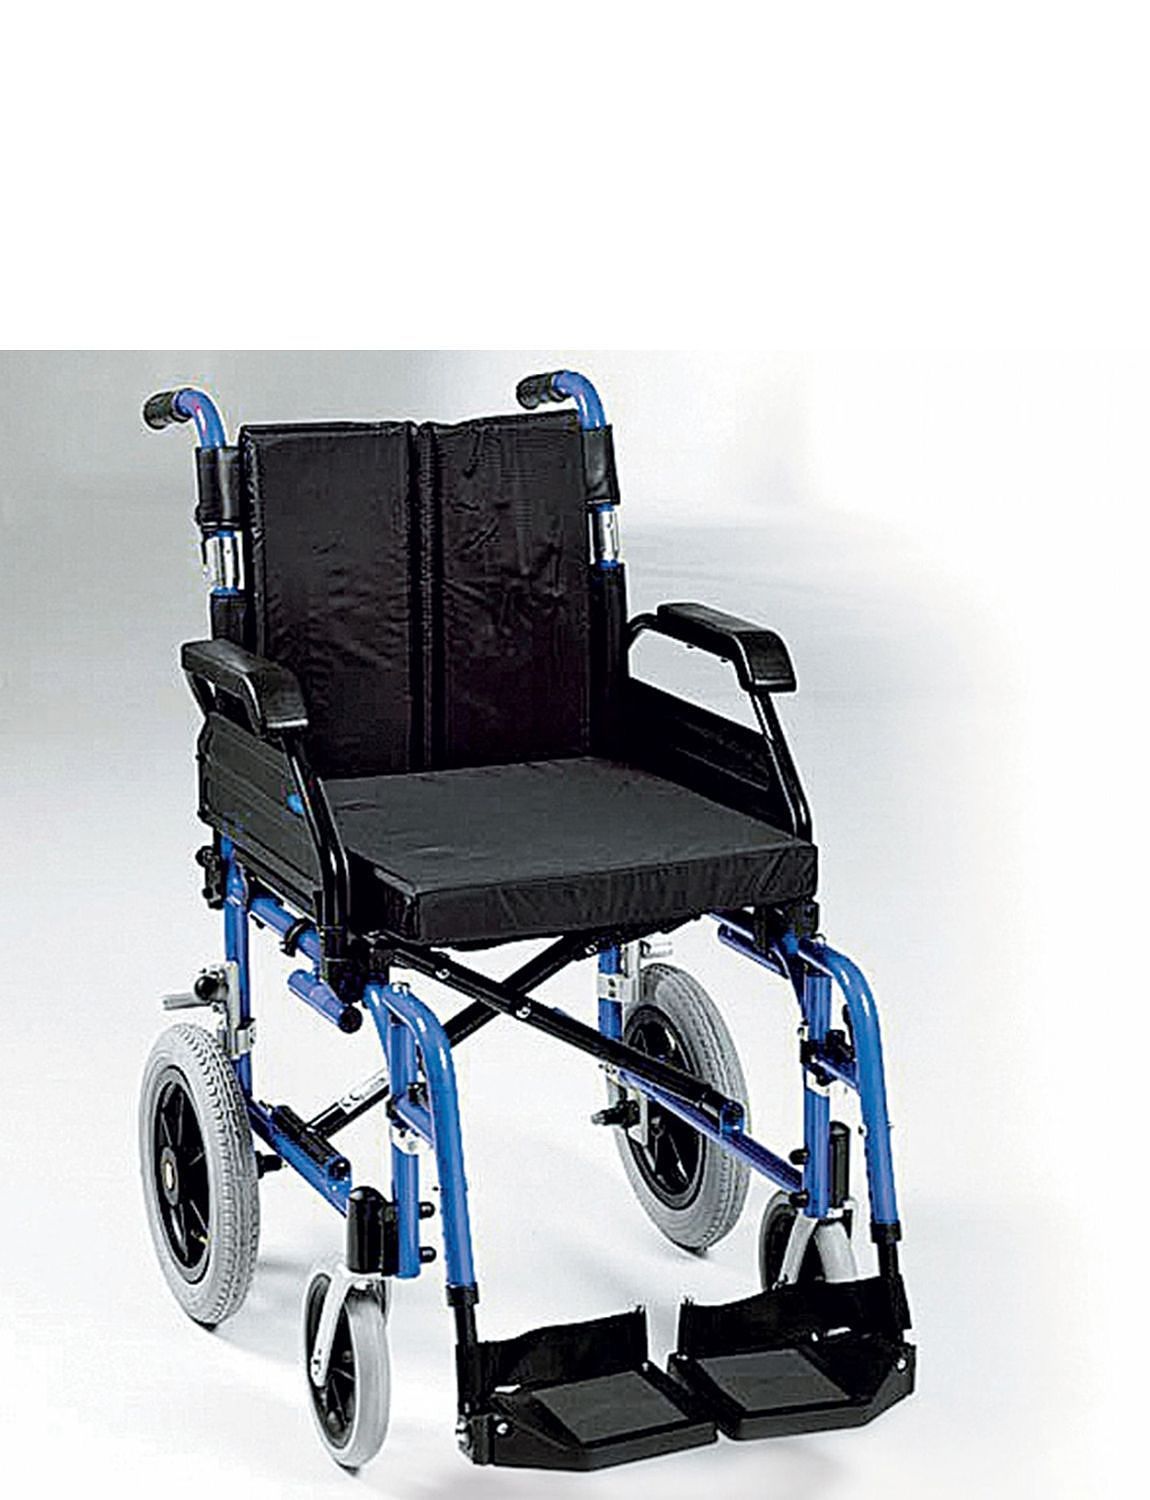 Deluxe Foldable Attendant Aluminium Wheelchair - Mobility Wheelchairs